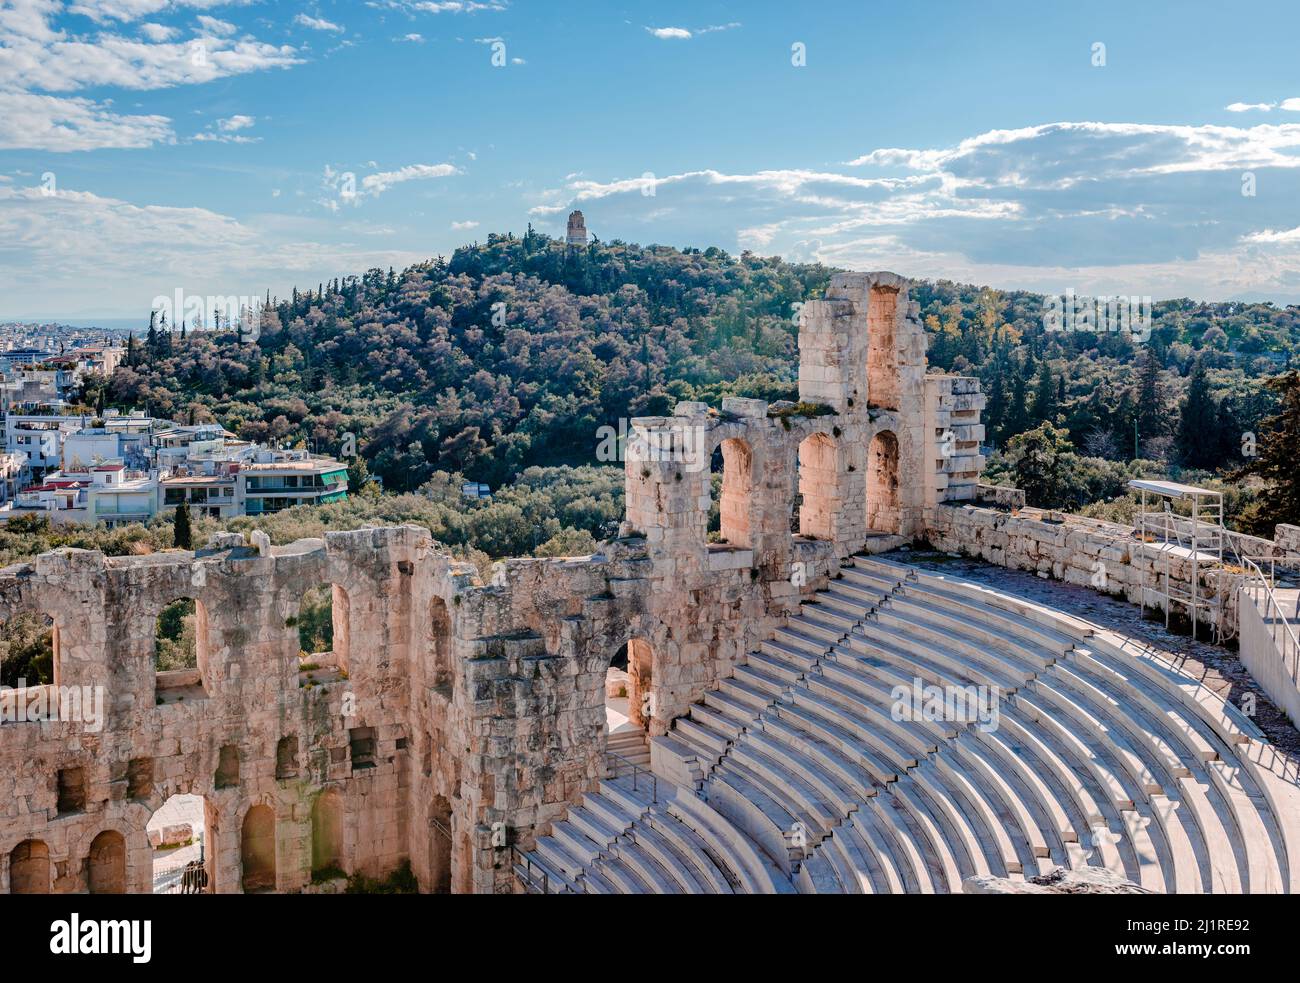 The Odeon of Herodes Atticus, located on the southwest slope of the Acropolis and the Filopappos Hill with the Filopappos monument on top. Athens, Att Stock Photo